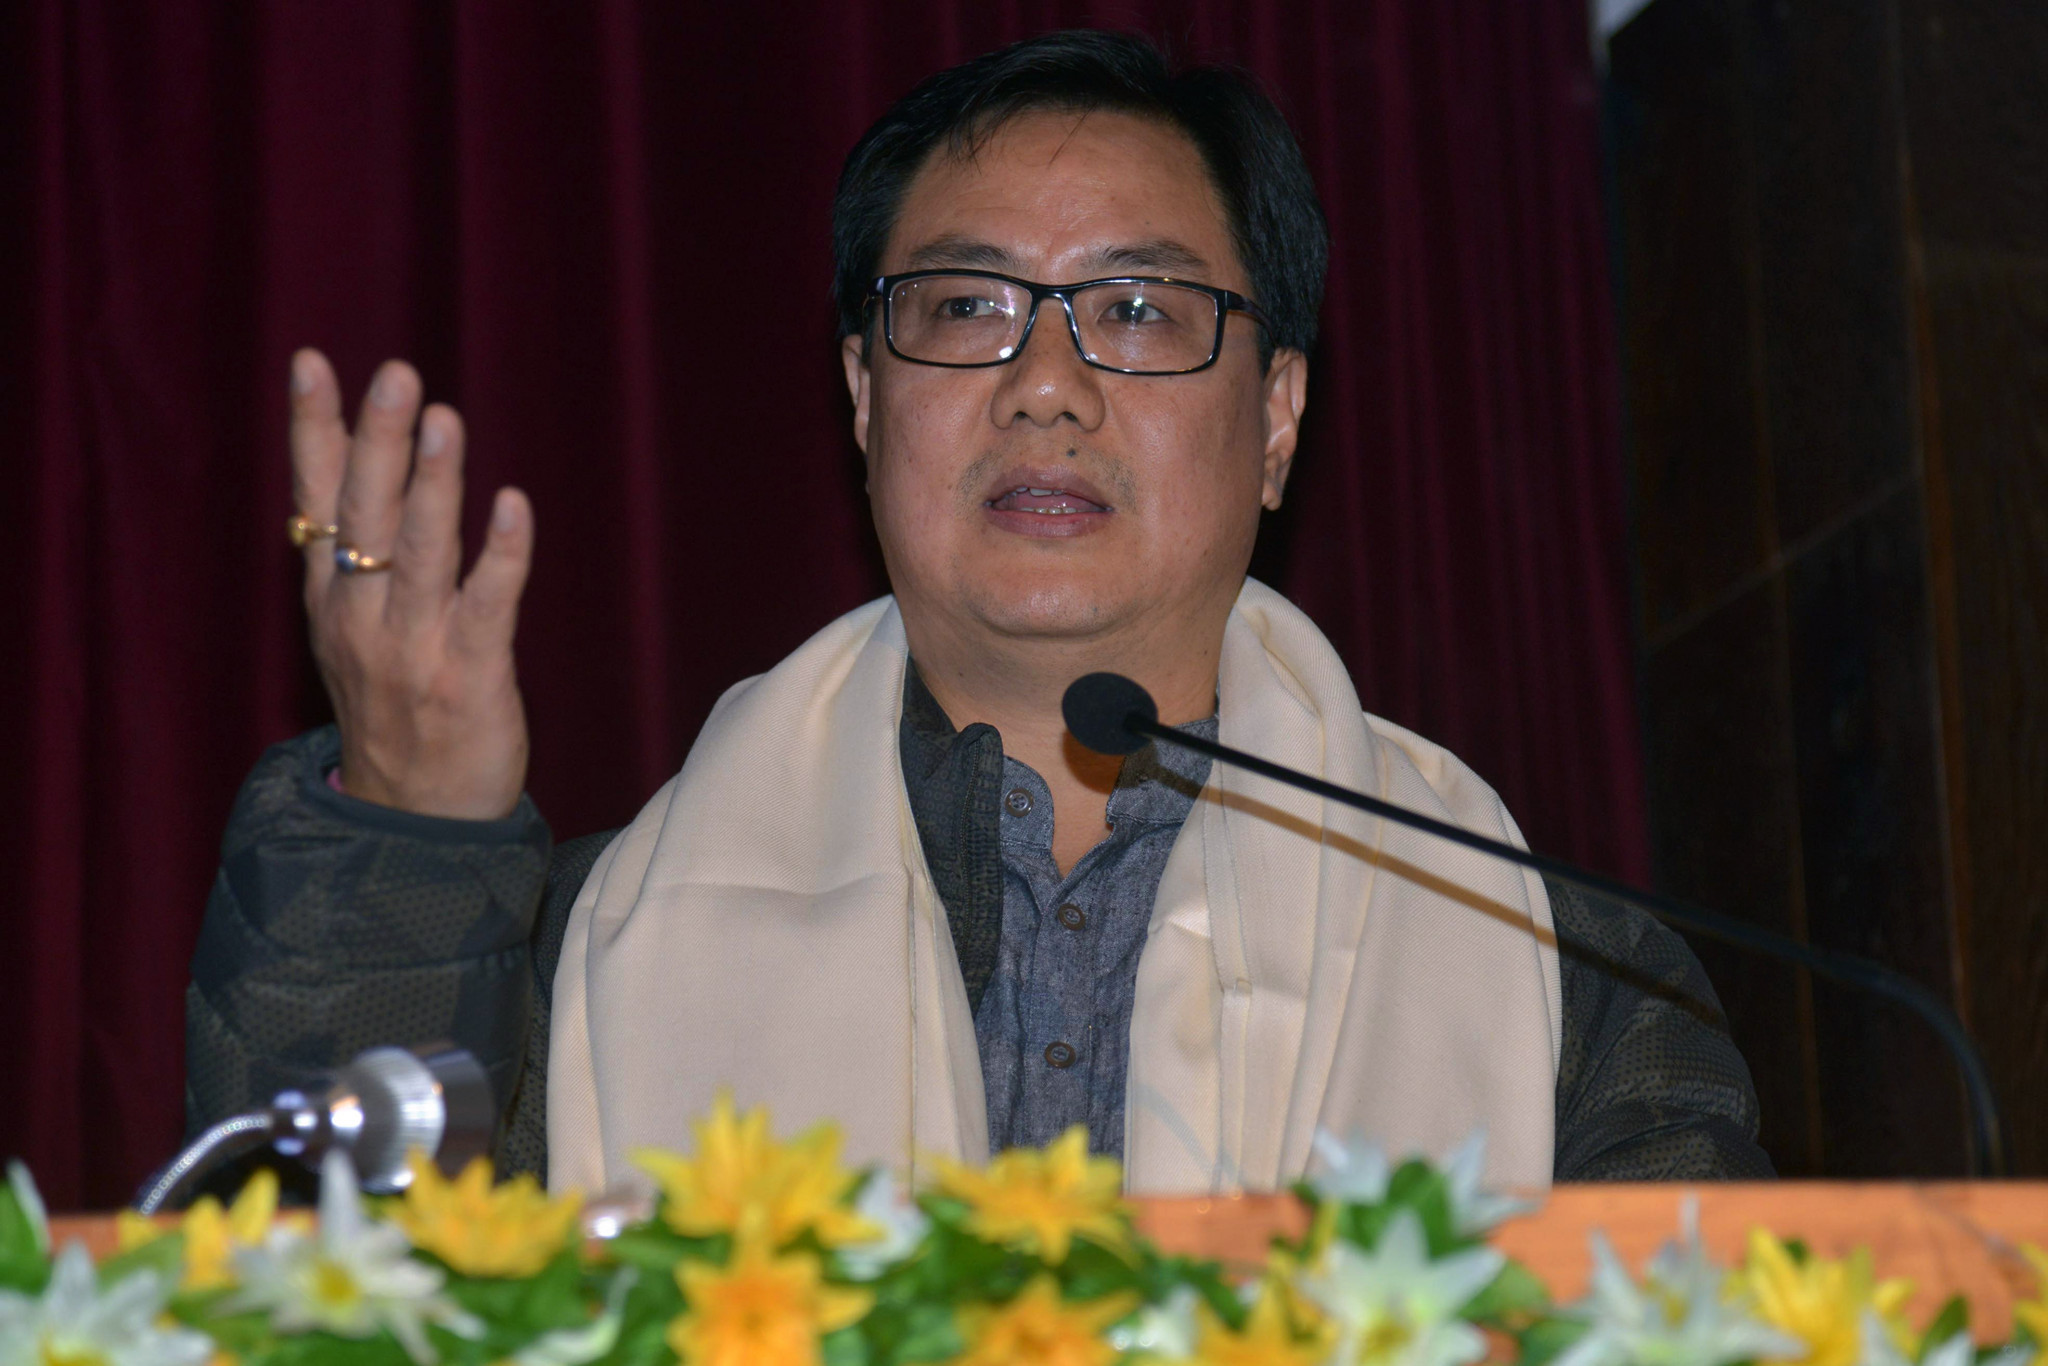 Indian Minister of Youth Affairs and Sports Kiren Rijiju says a final decision on boycotting Birmingham 2022 will be made by the Government ©Getty Images